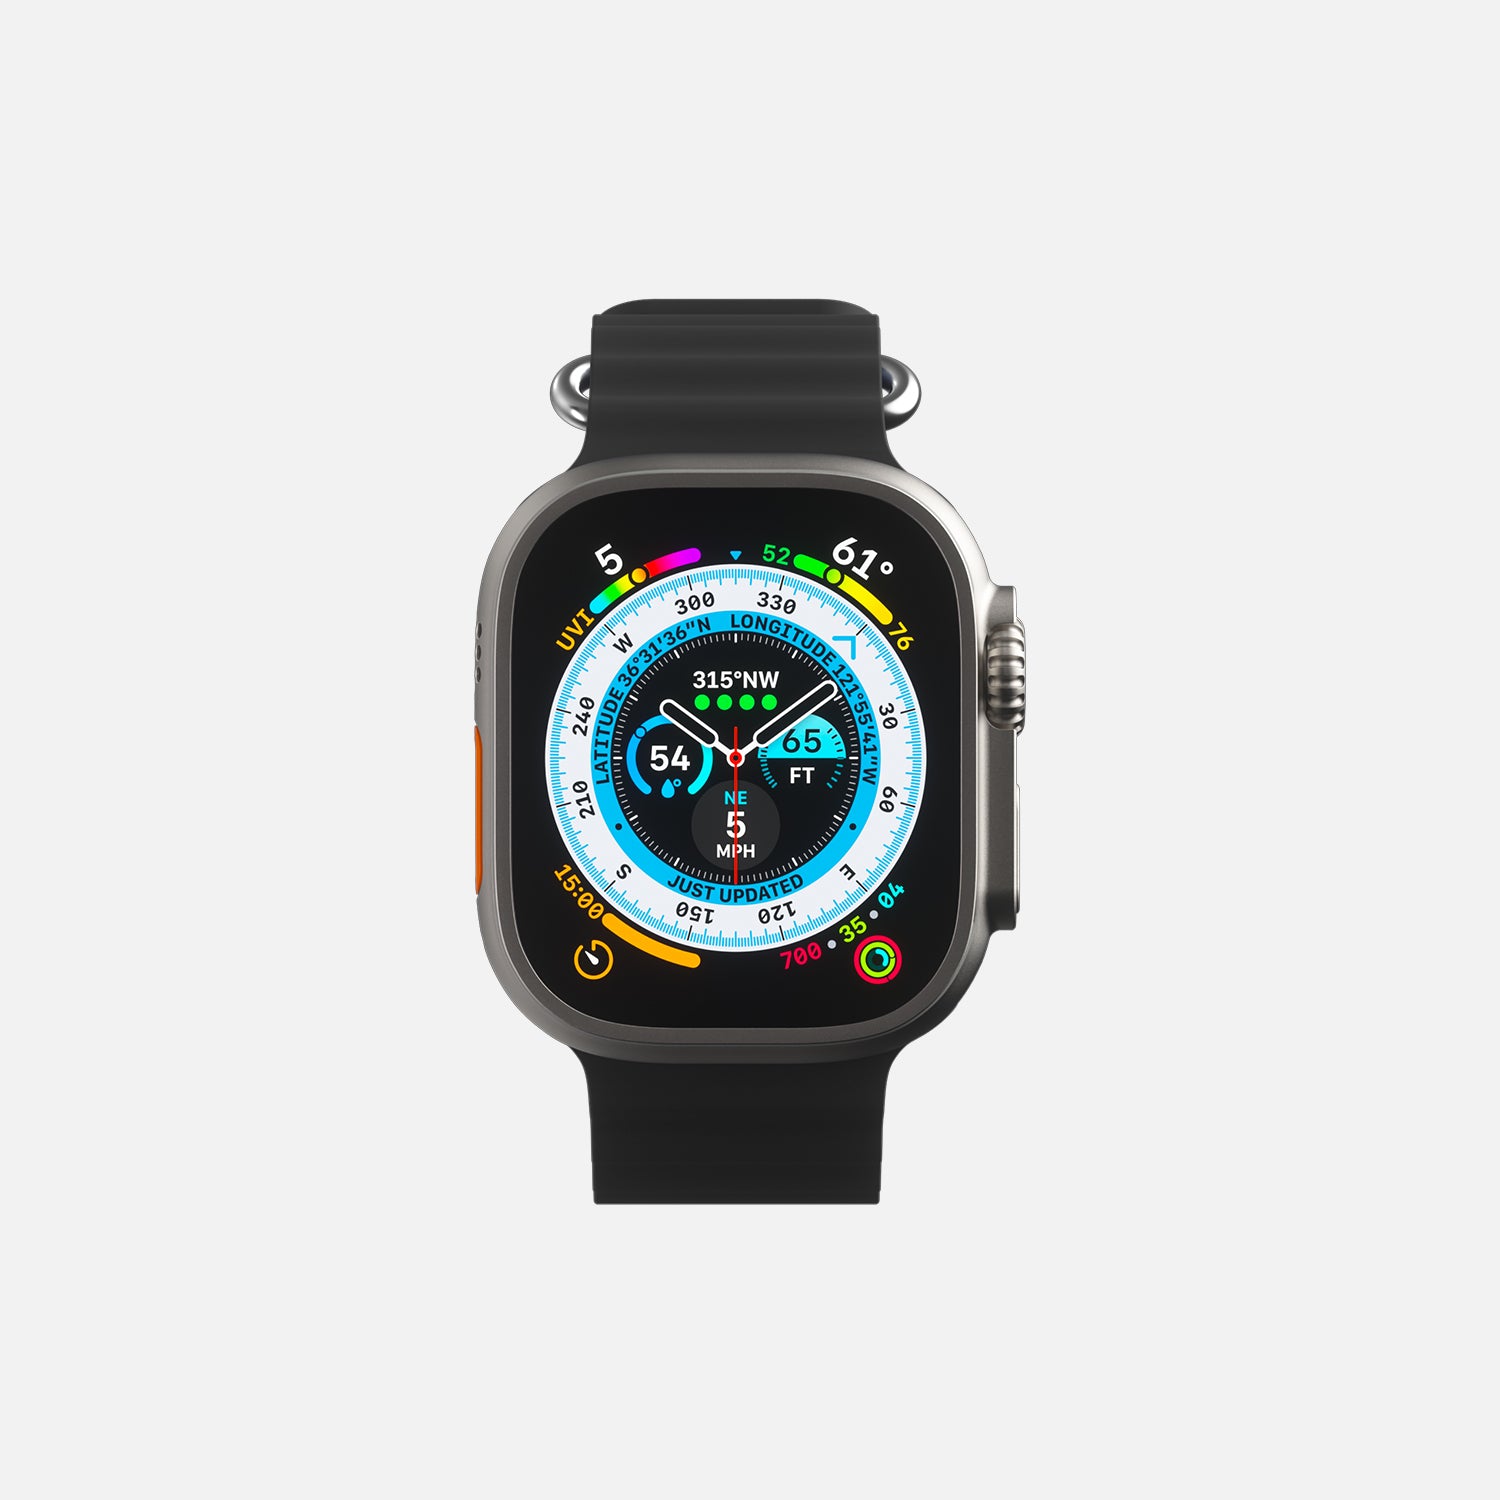 Apple Smartwatch with colorful display featuring fitness tracking dials on white background.